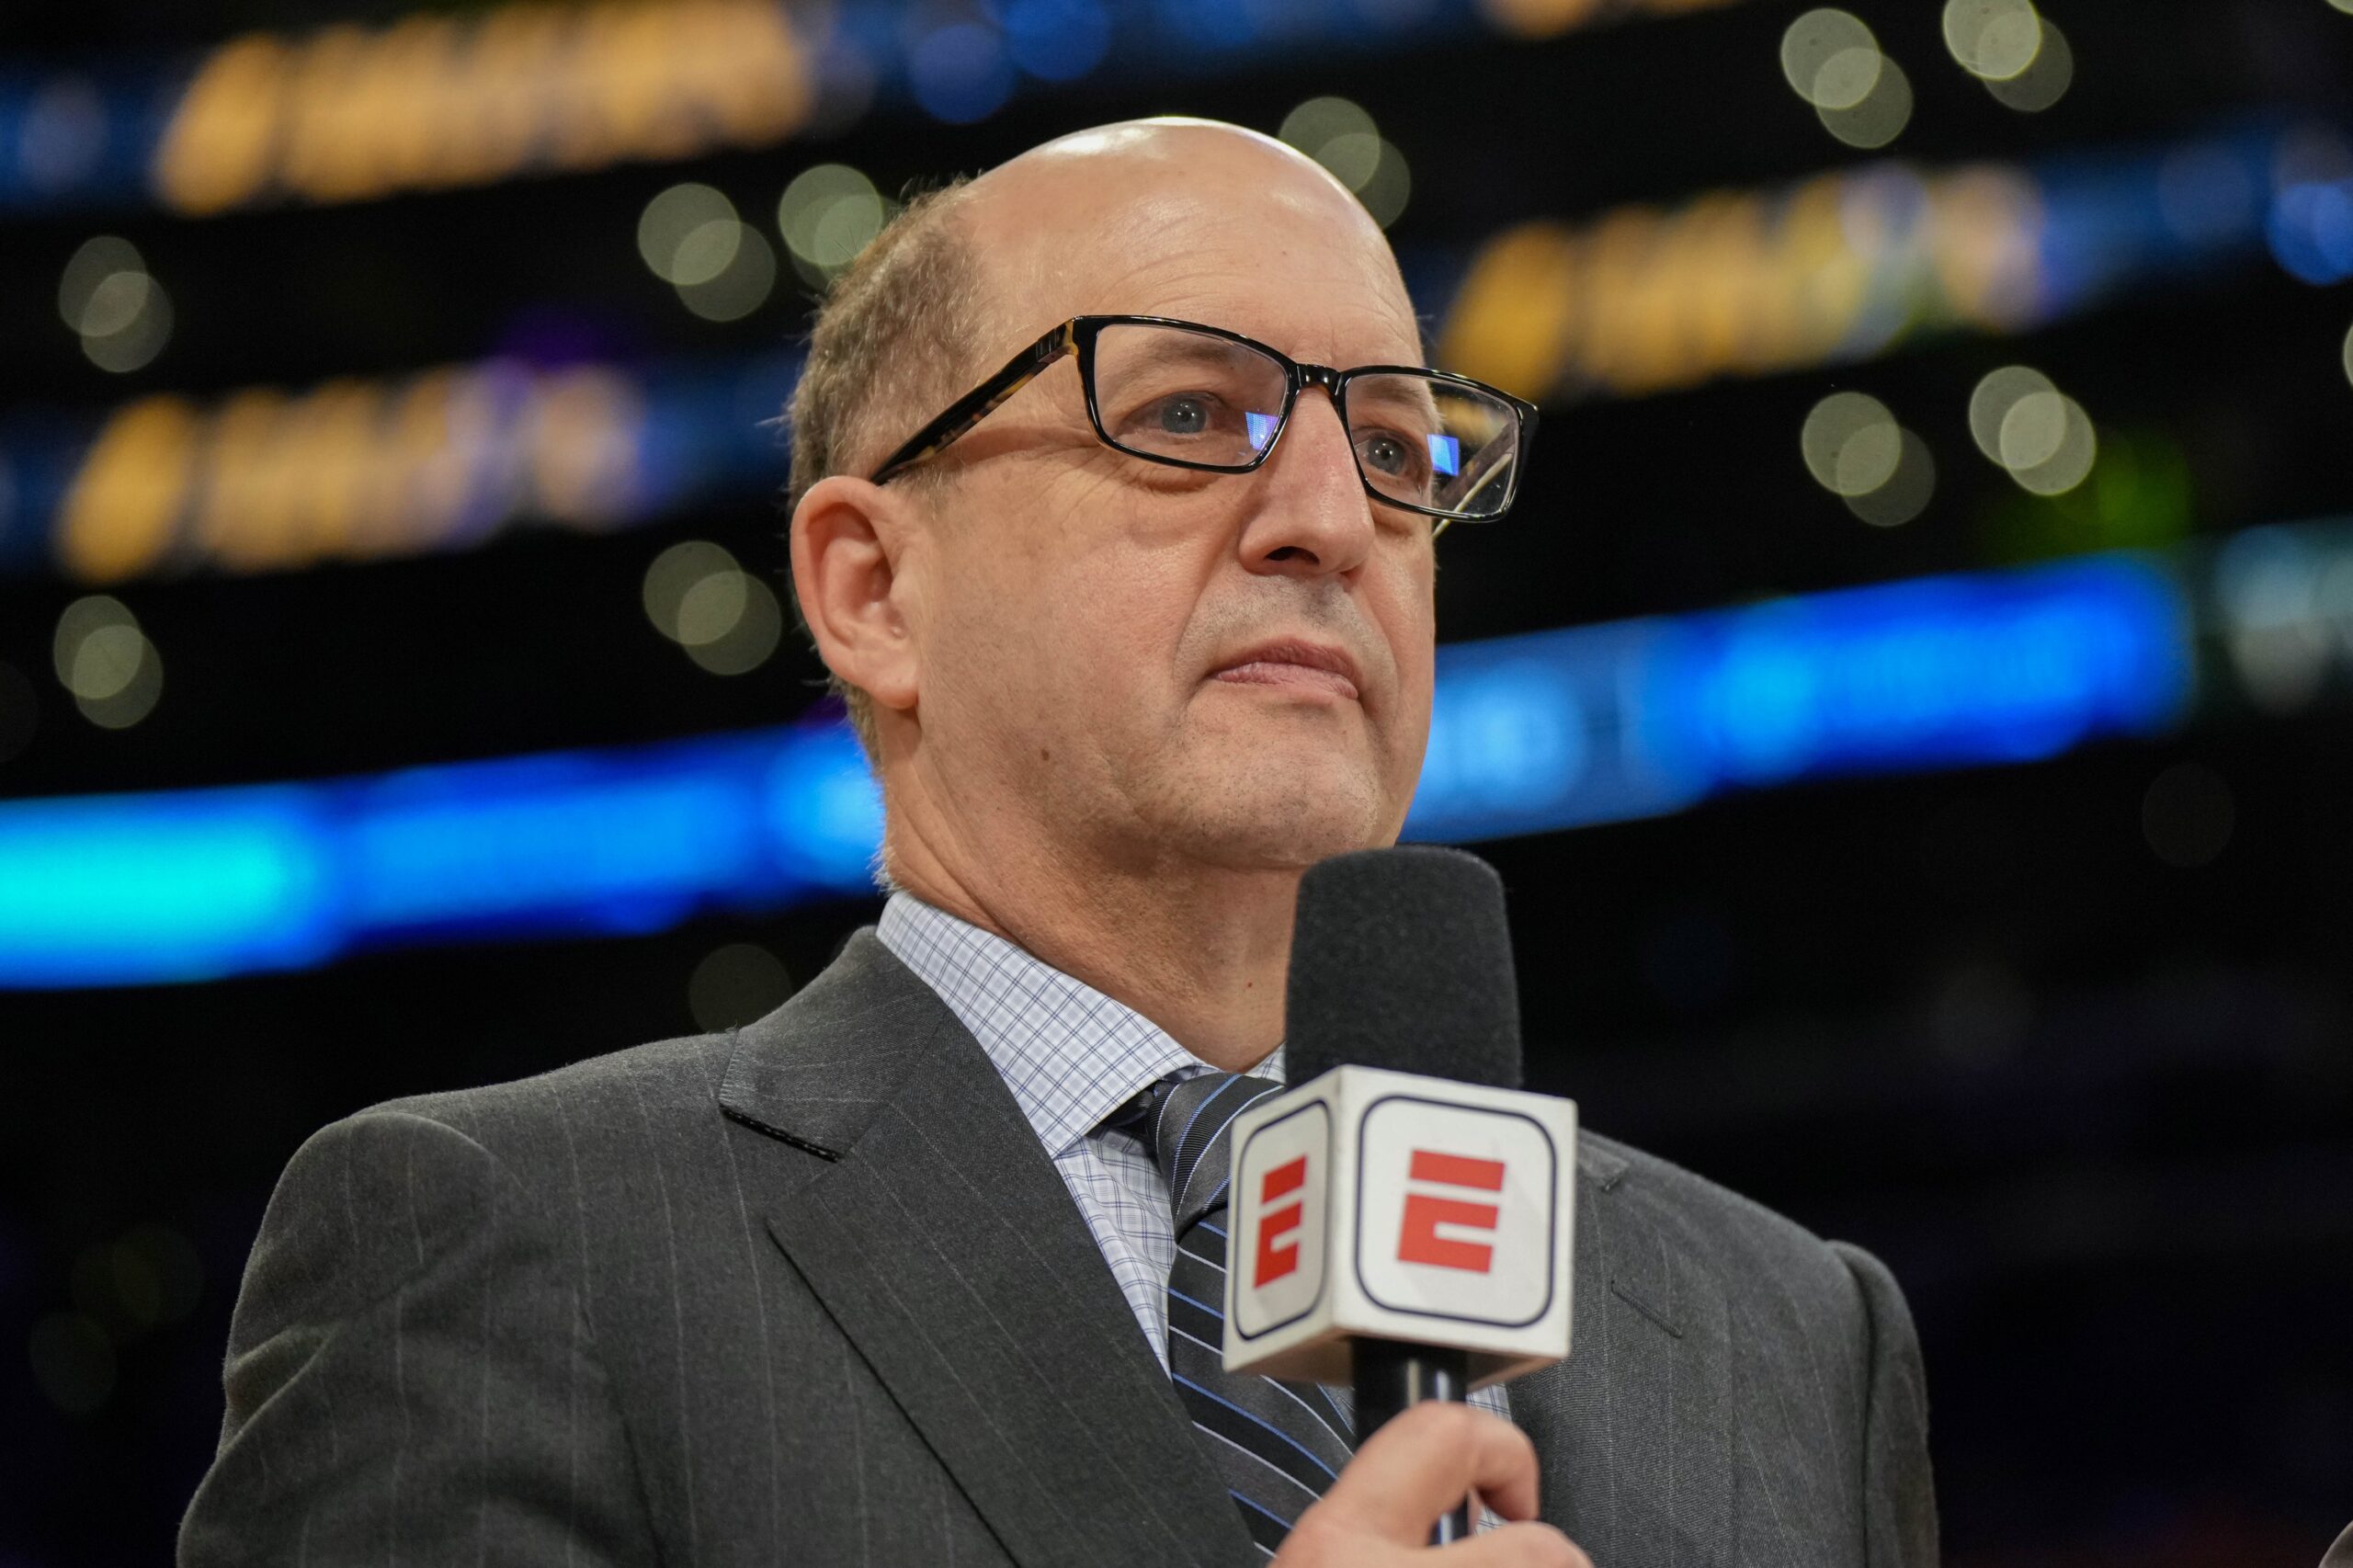 May 22, 2023; Los Angeles, California, USA; ESPN commentator Jeff Van Gundy during game four of the Western Conference Finals for the 2023 NBA playoffs between the Denver Nuggets and the Los Angeles Lakers at Crypto.com Arena. Mandatory Credit: Kirby Lee-USA TODAY Sports